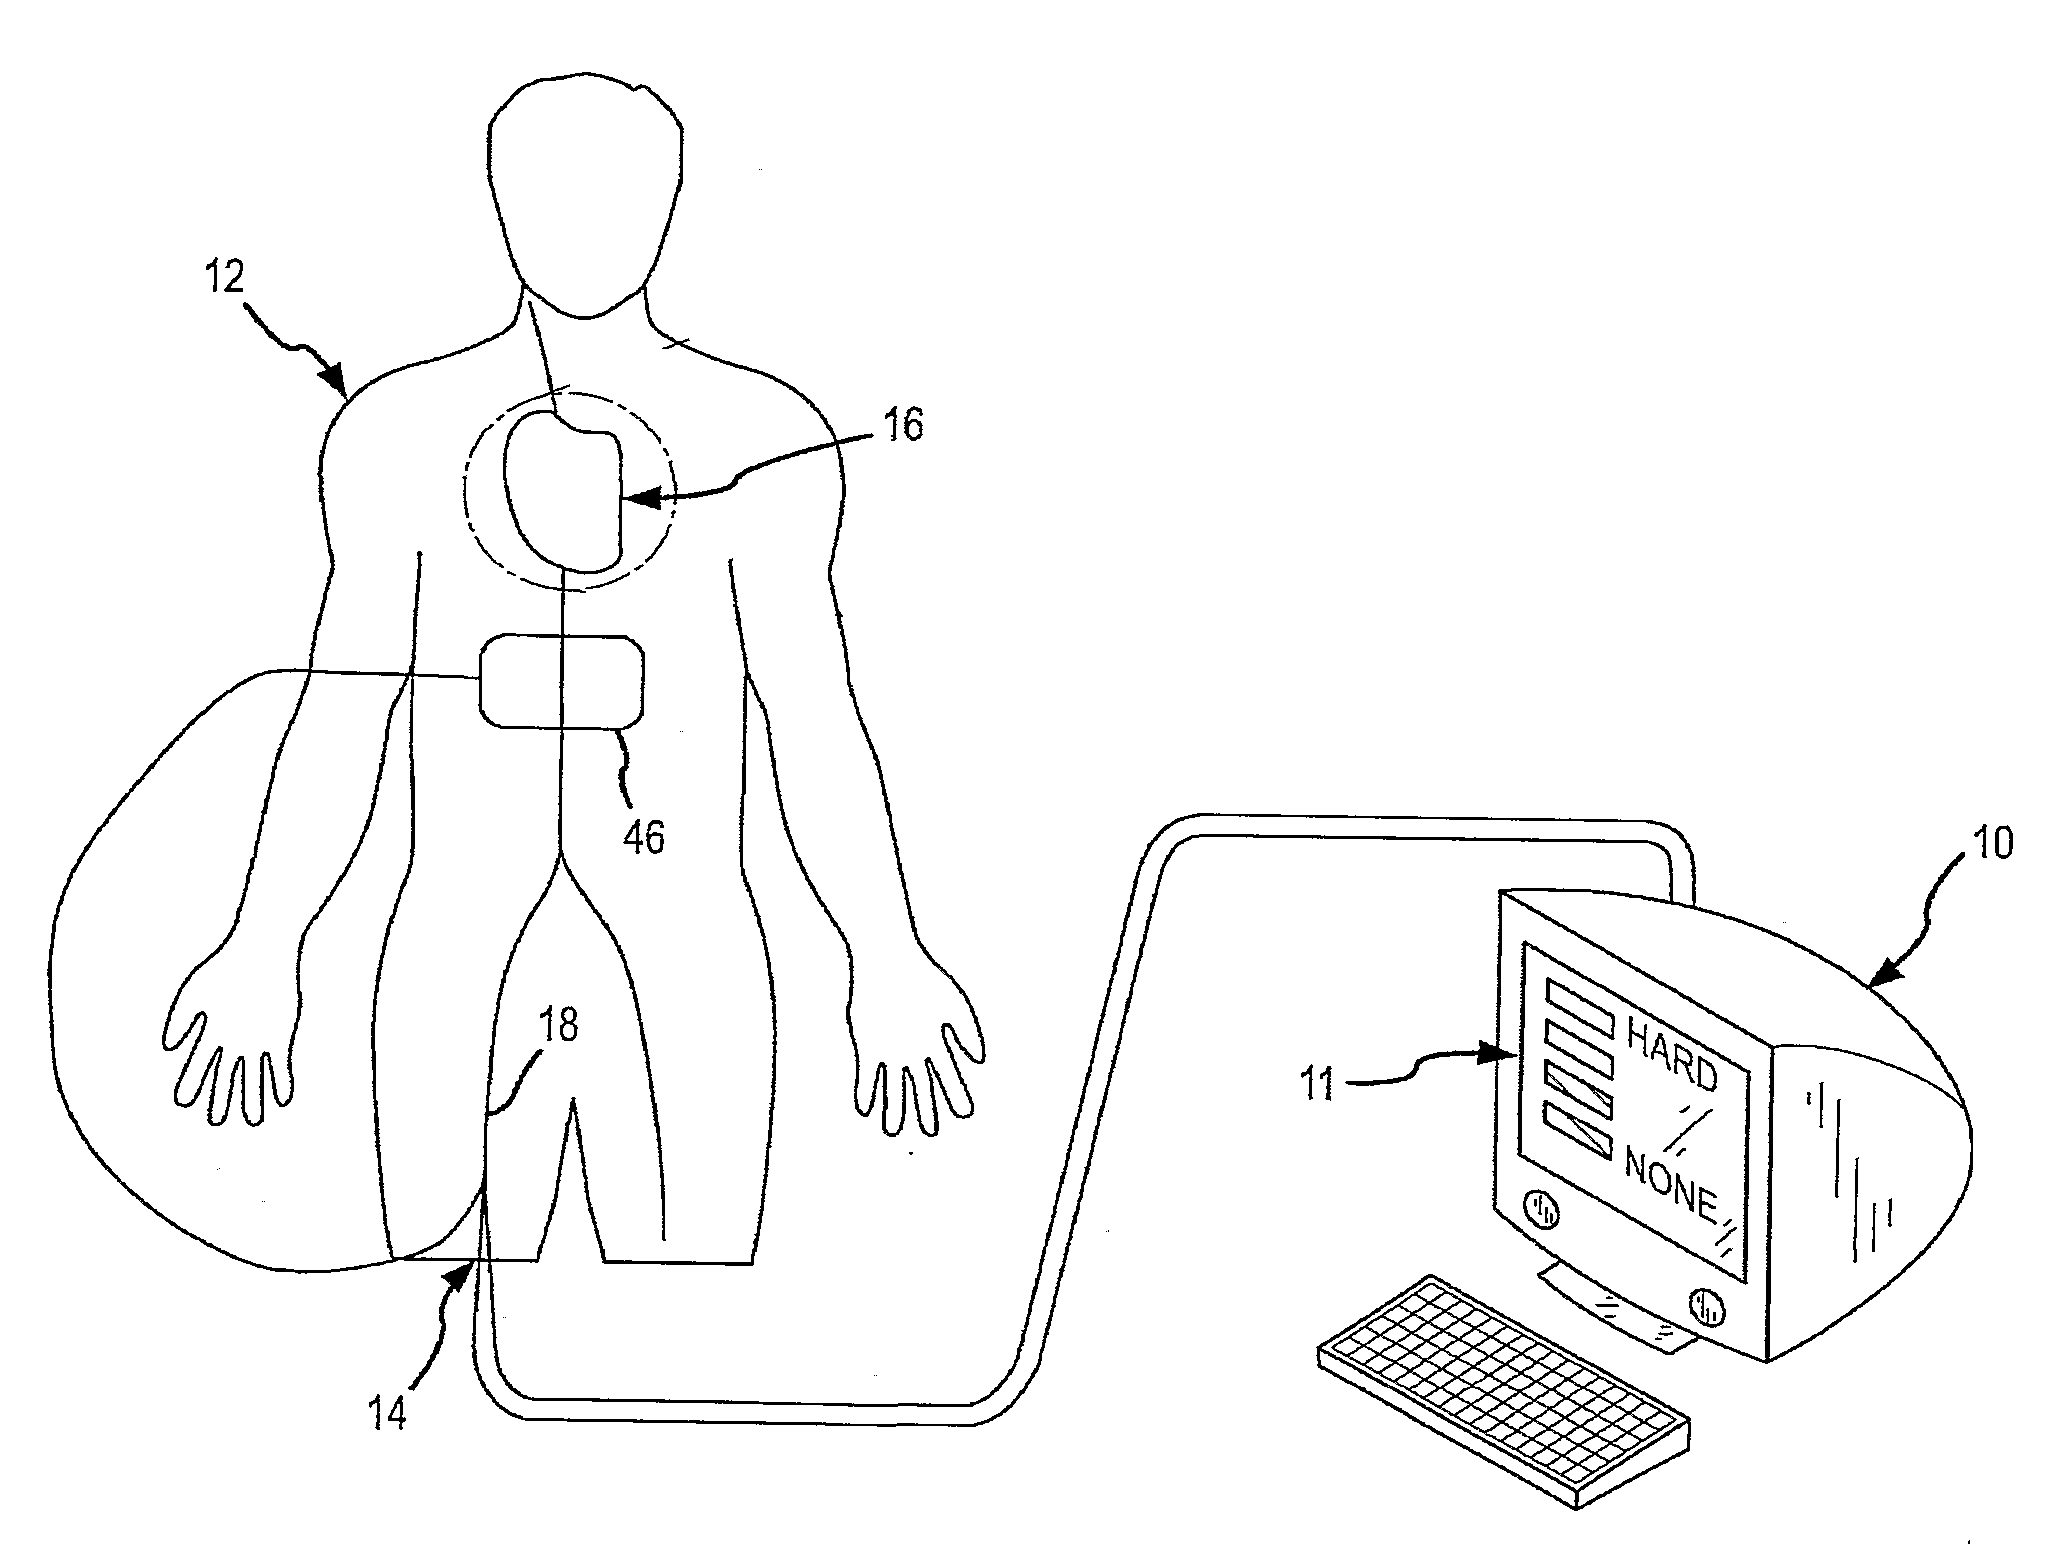 Design of Handle Set for Ablation Catheter with Indicators of Catheter and Tissue Parameters